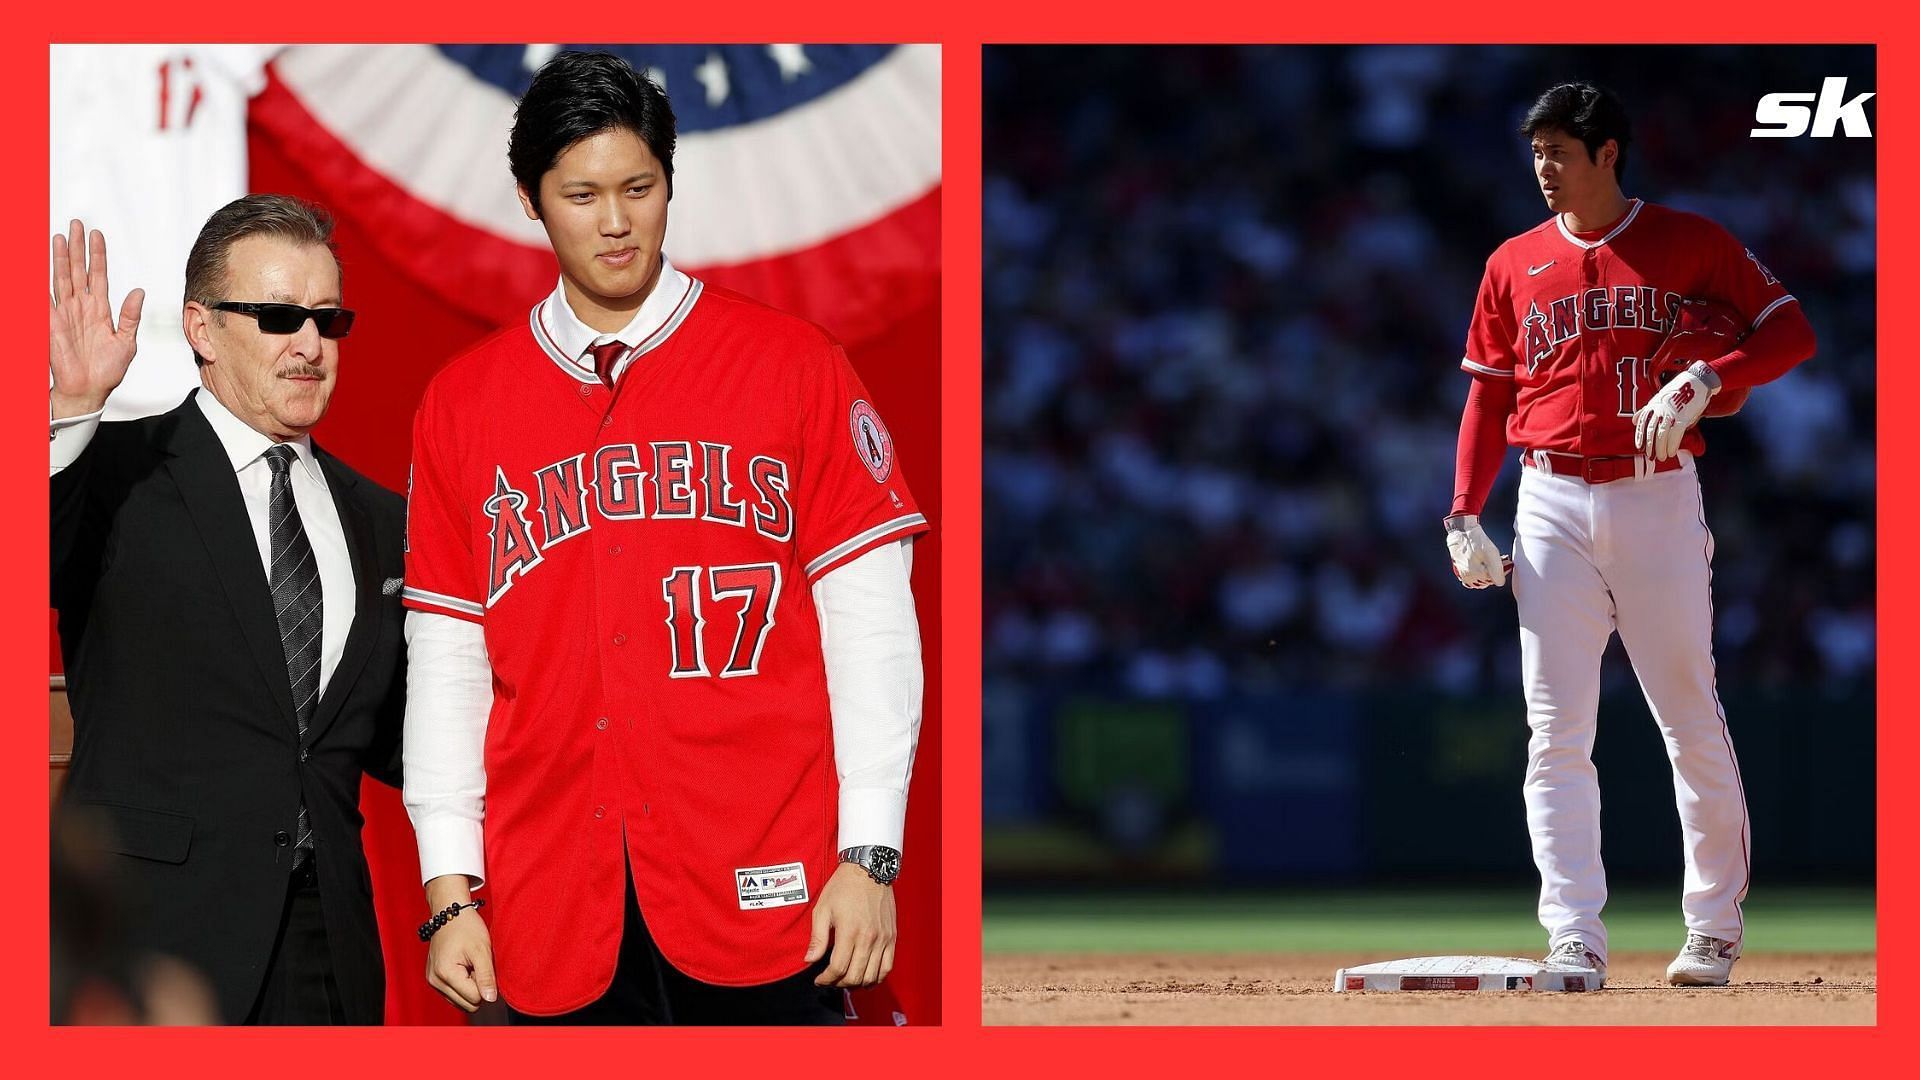 Is Shohei Ohtani going to be traded?